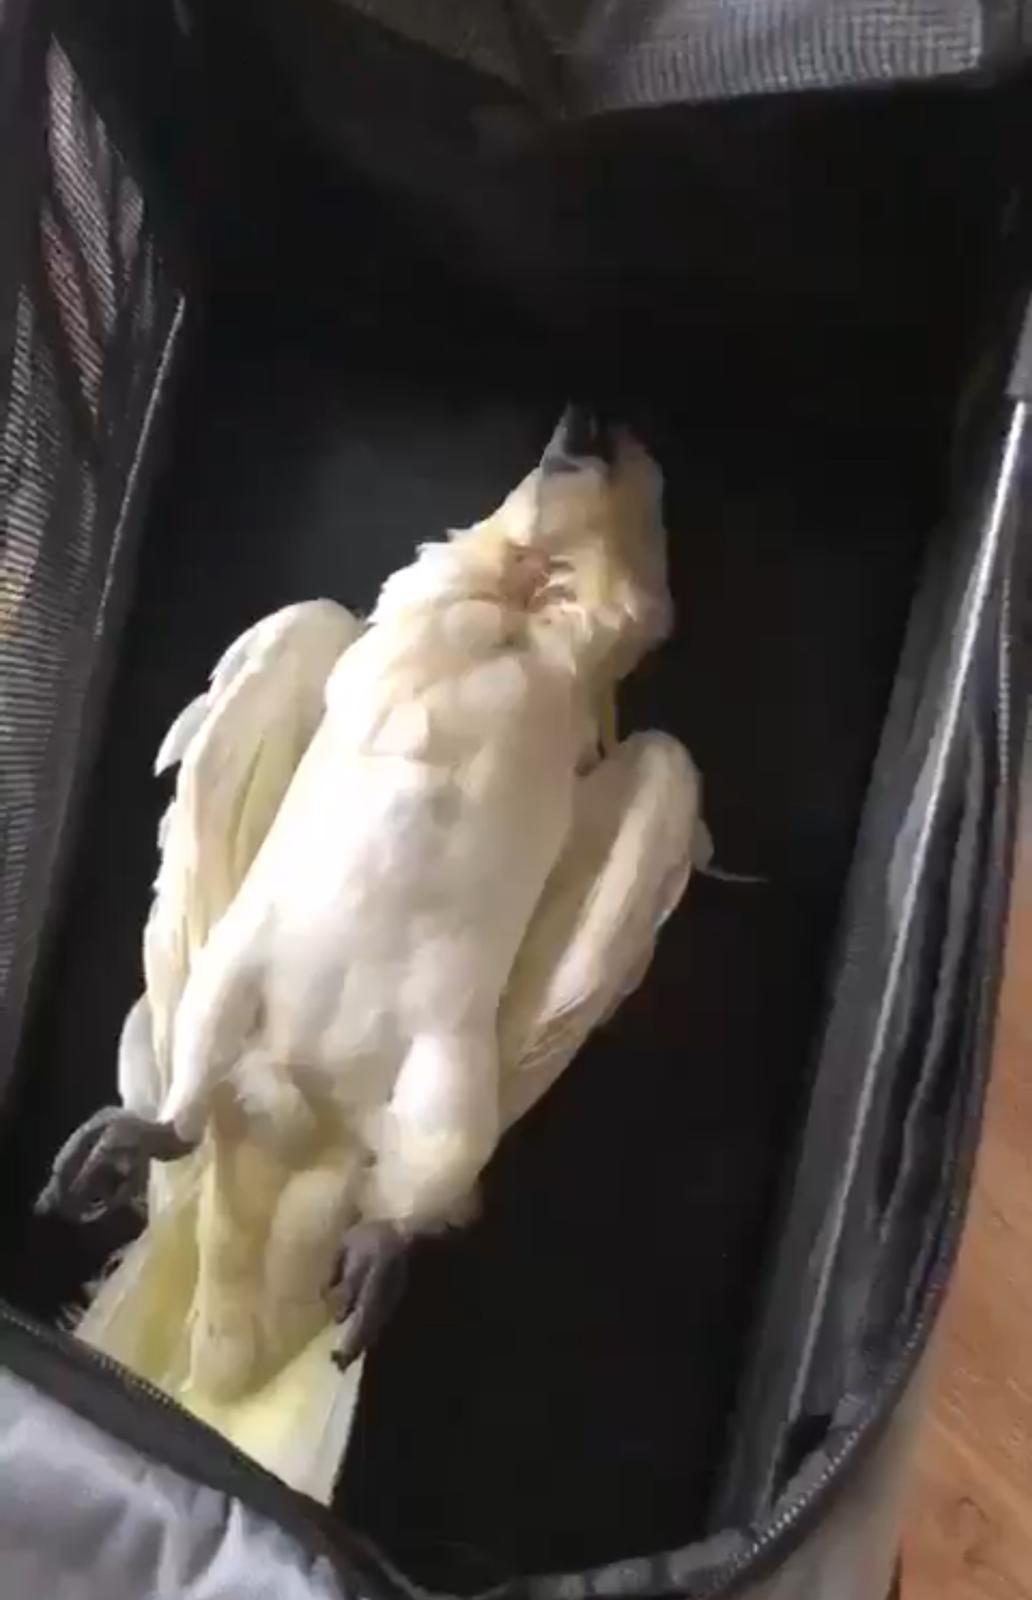 Frank the parrot died after falling ill.